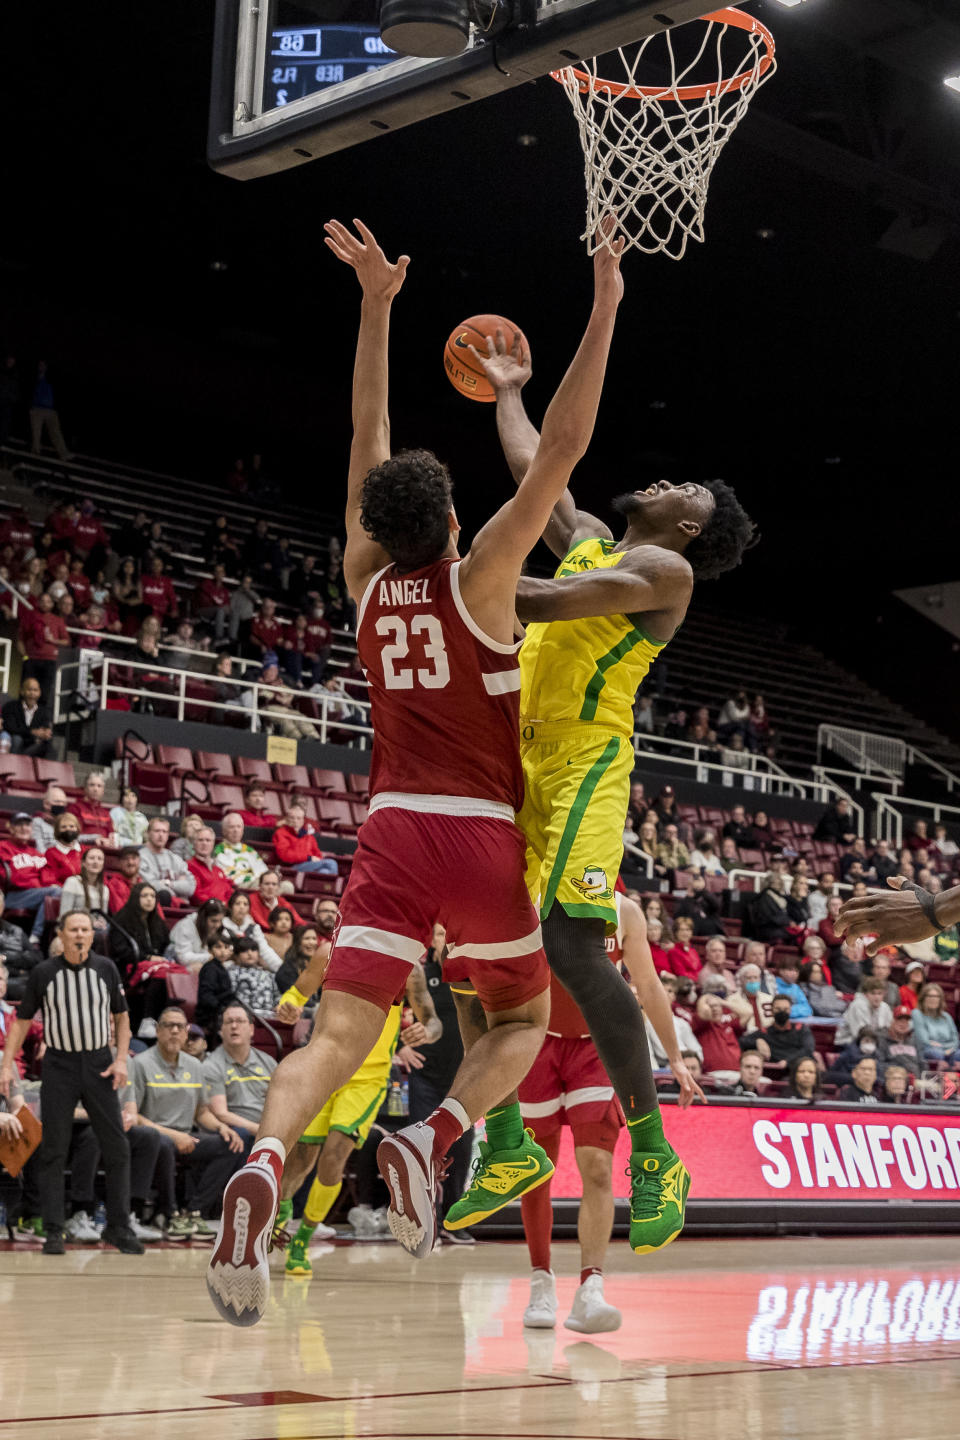 Stanford forward Brandon Angel (23) fouls Oregon guard Jermaine Couisnard during the second half of an NCAA college basketball game in Stanford, Calif., Saturday, Jan. 21, 2023. Stanford won 71-64. (AP Photo/John Hefti)